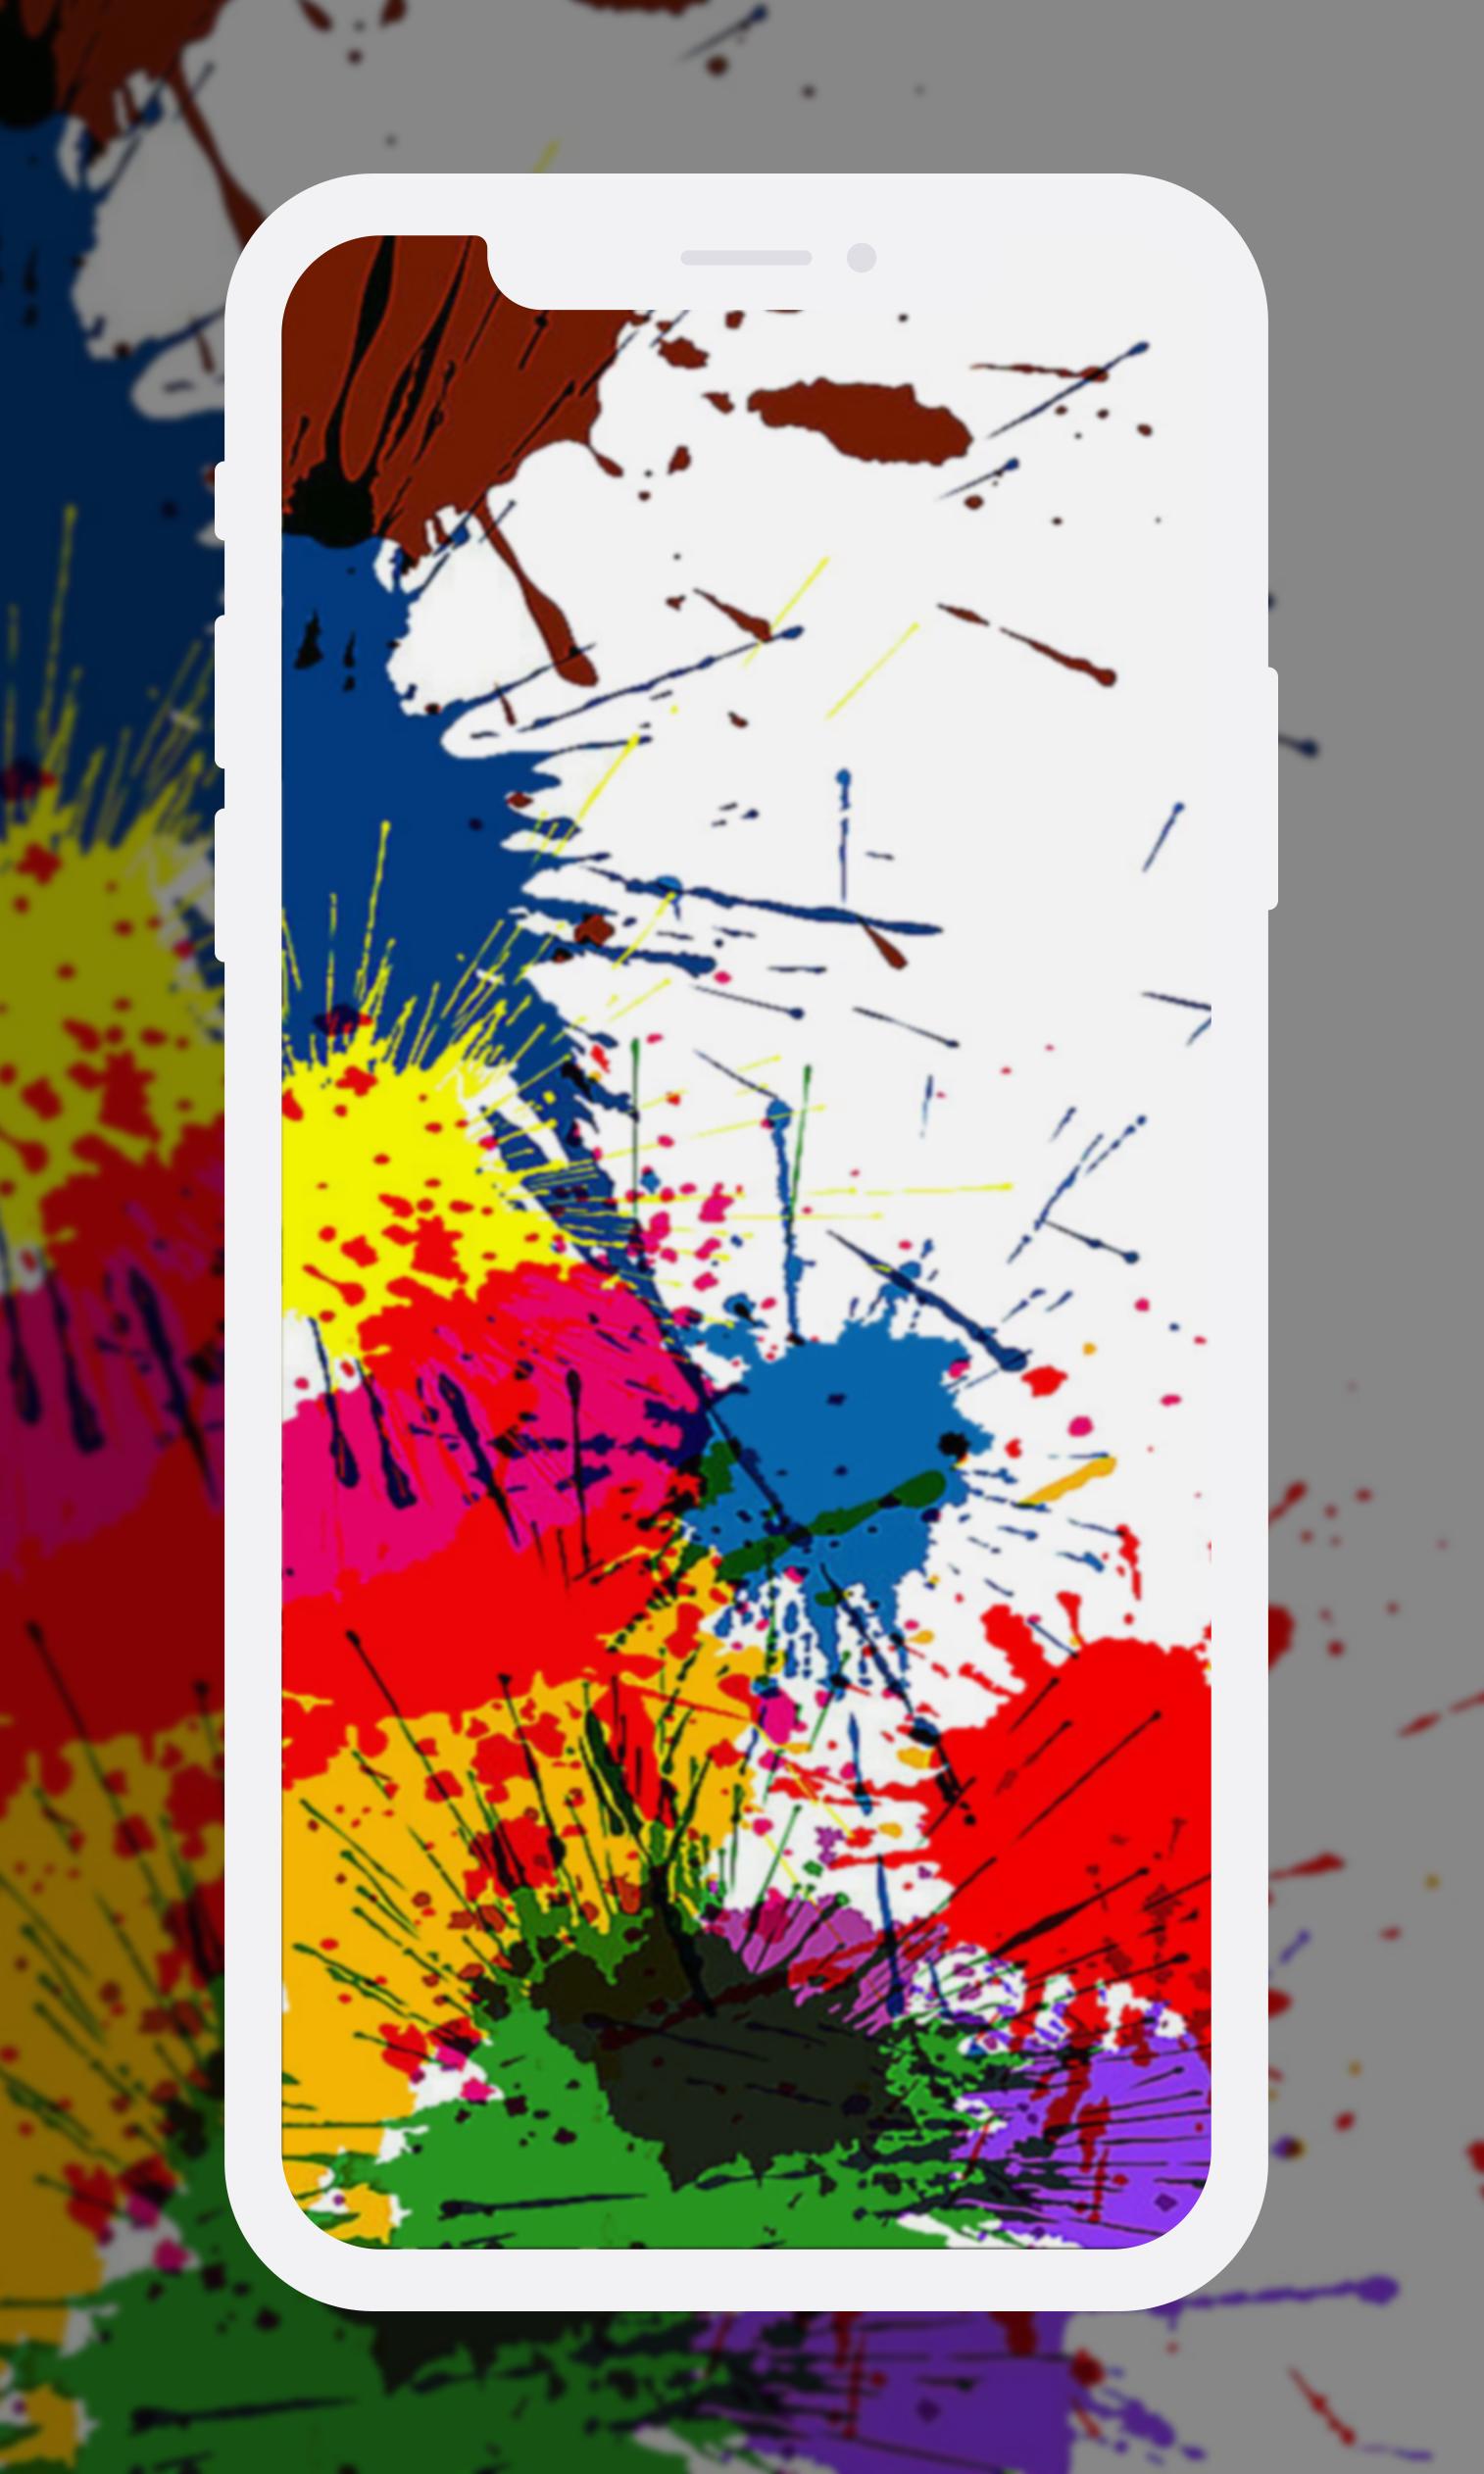 Paint Splash Wallpapers Hd For Android Apk Download